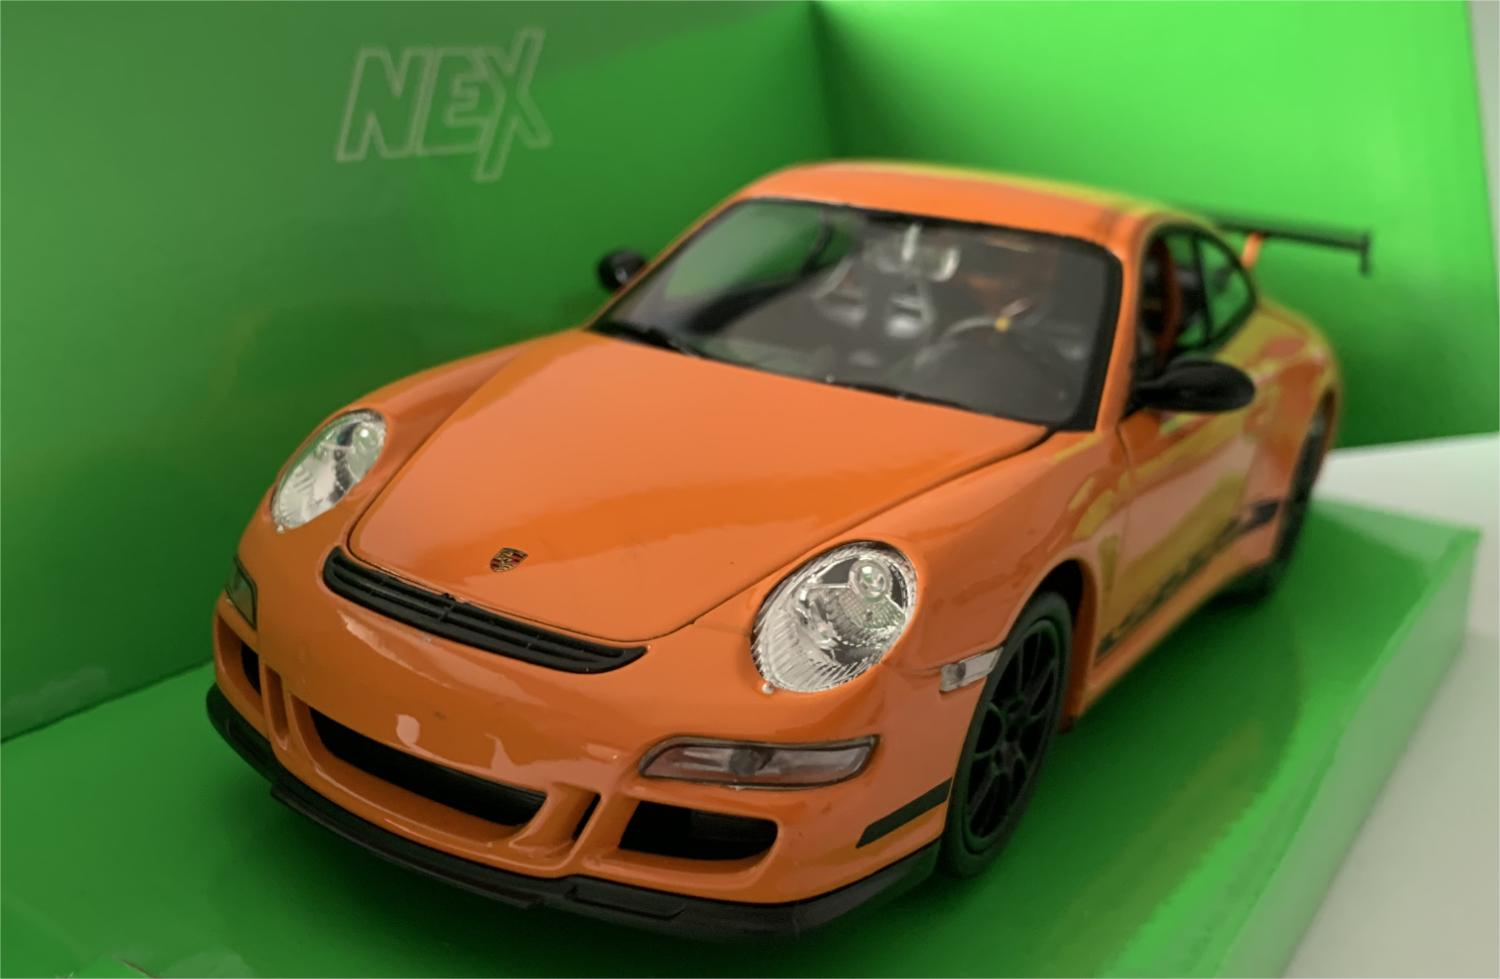 An excellent scale model of a Porsche 911 GTS RS decorated in orange with black spoiler, authentic graphics and black wheels